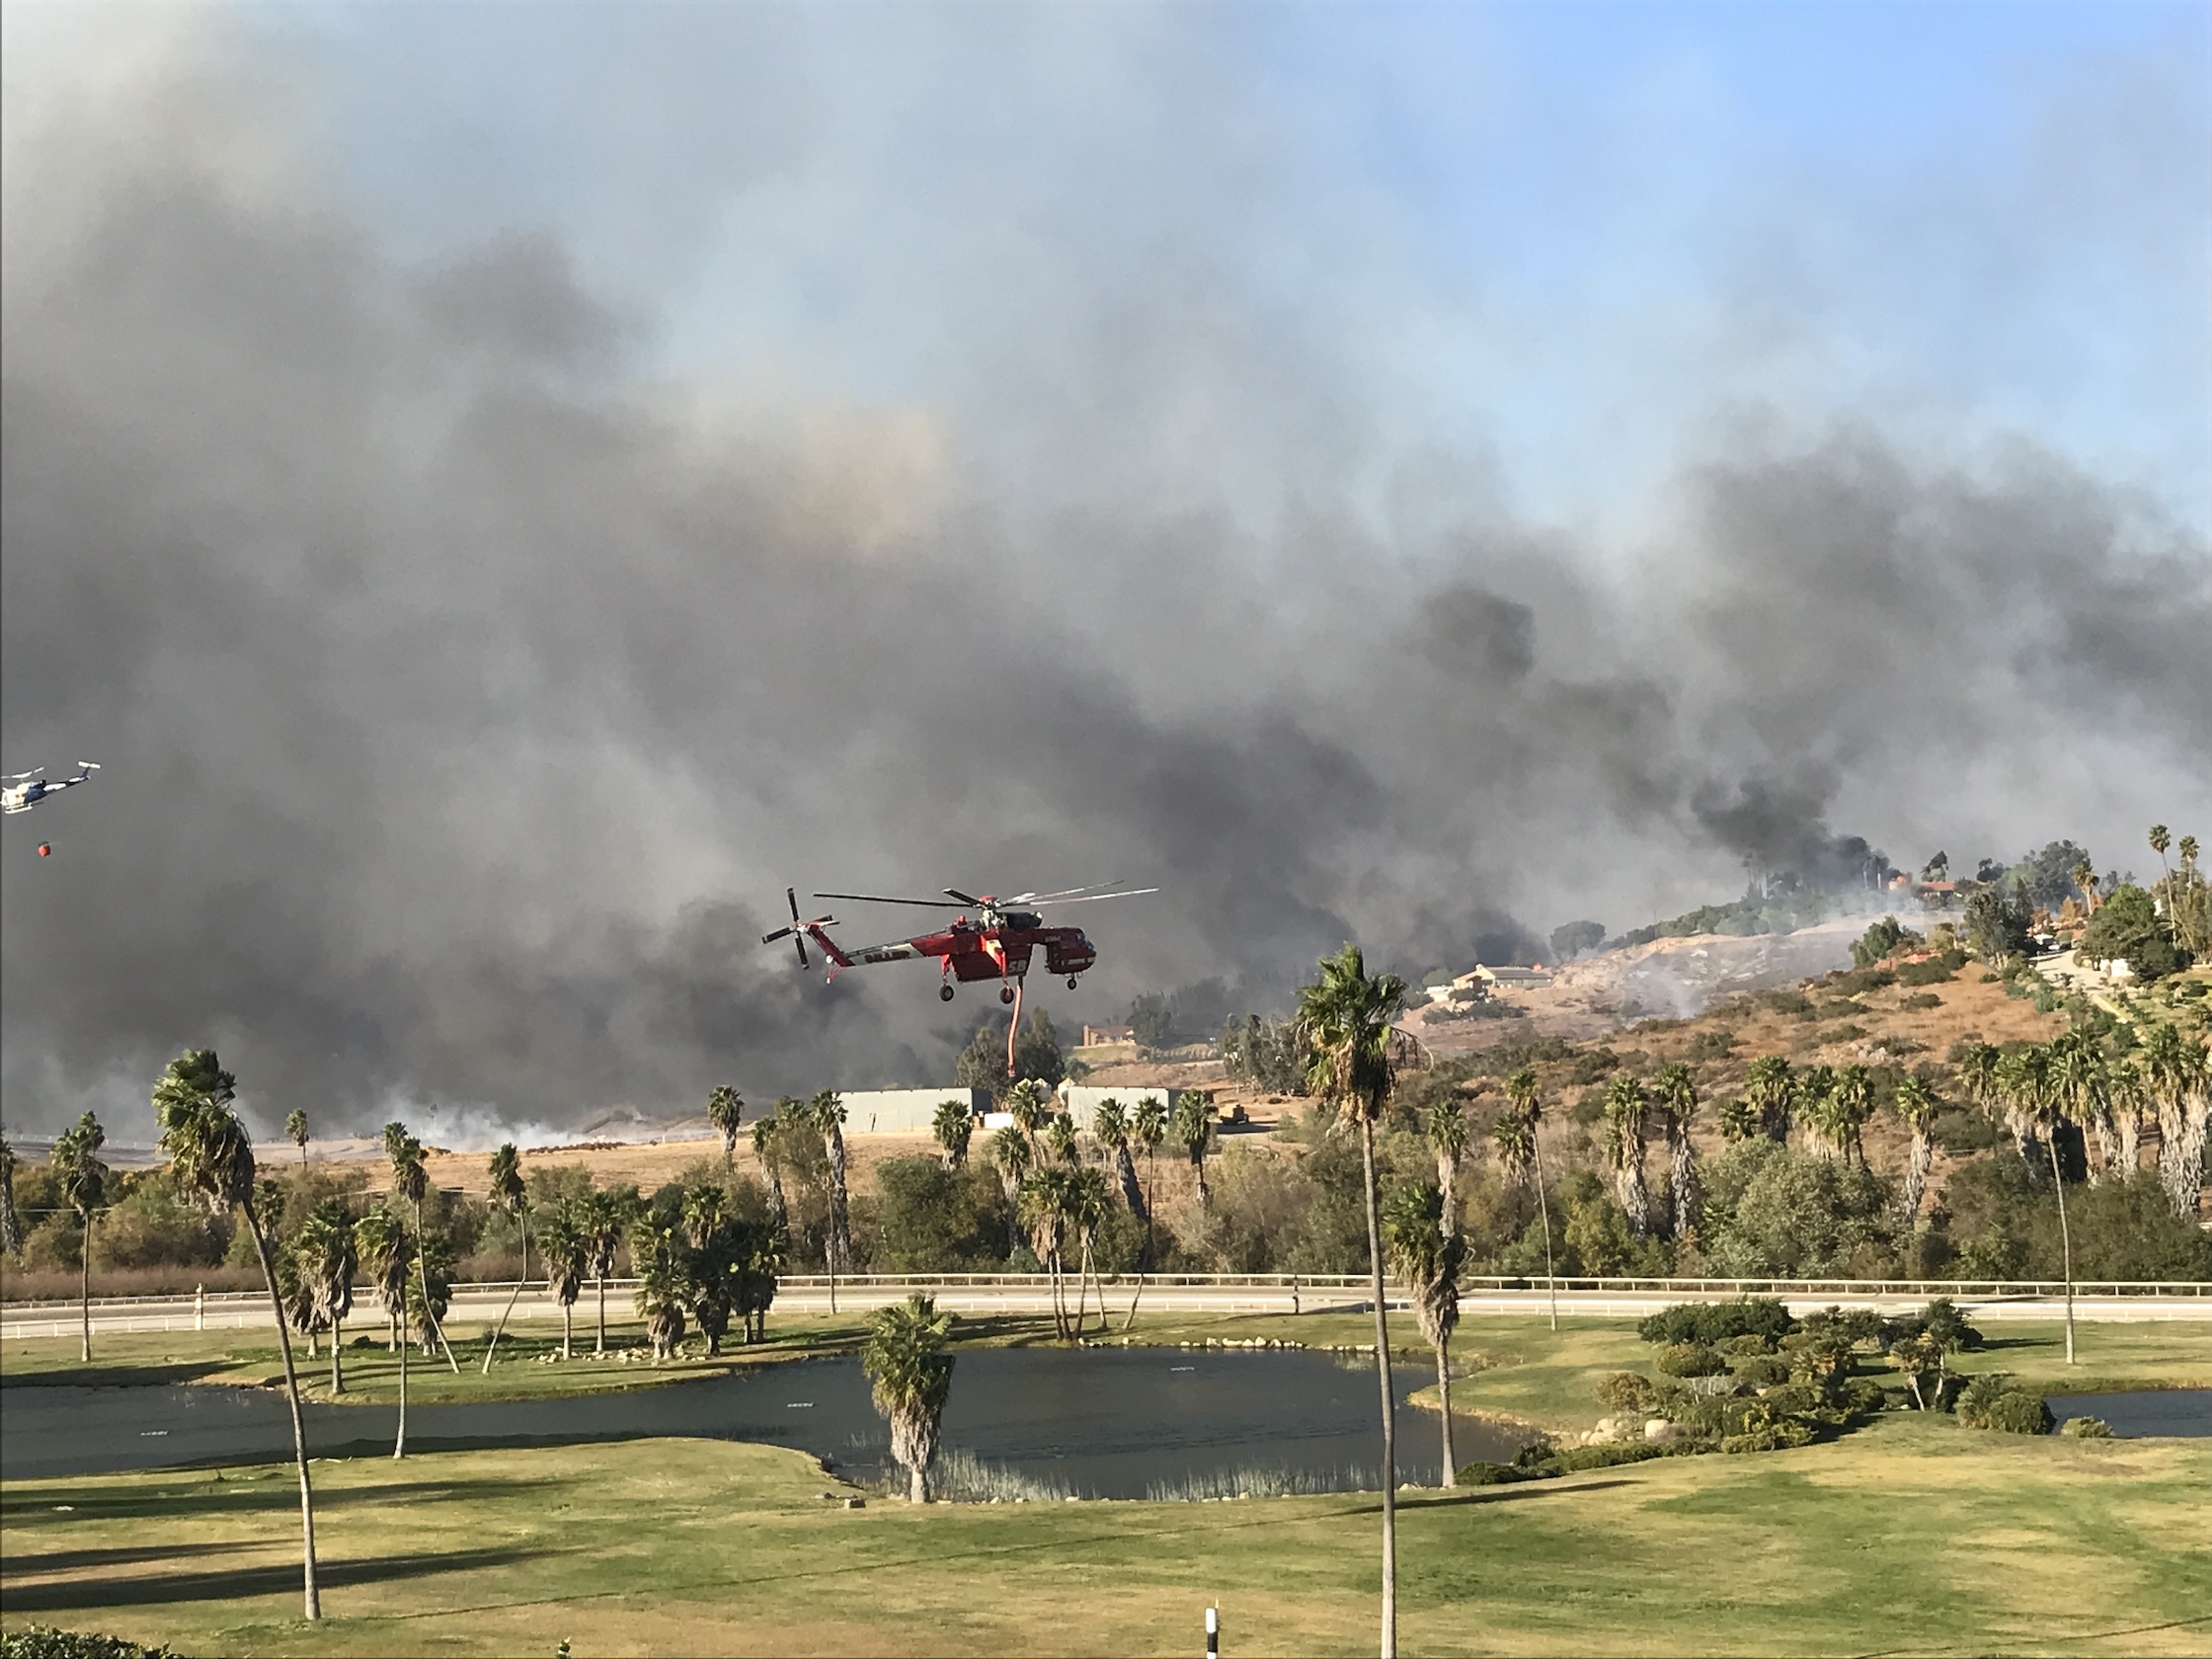 A helicopter arrives to suck water from the ponds at the Trifecta Equine Athletic Center, which is then taken to douse the raging wildfire